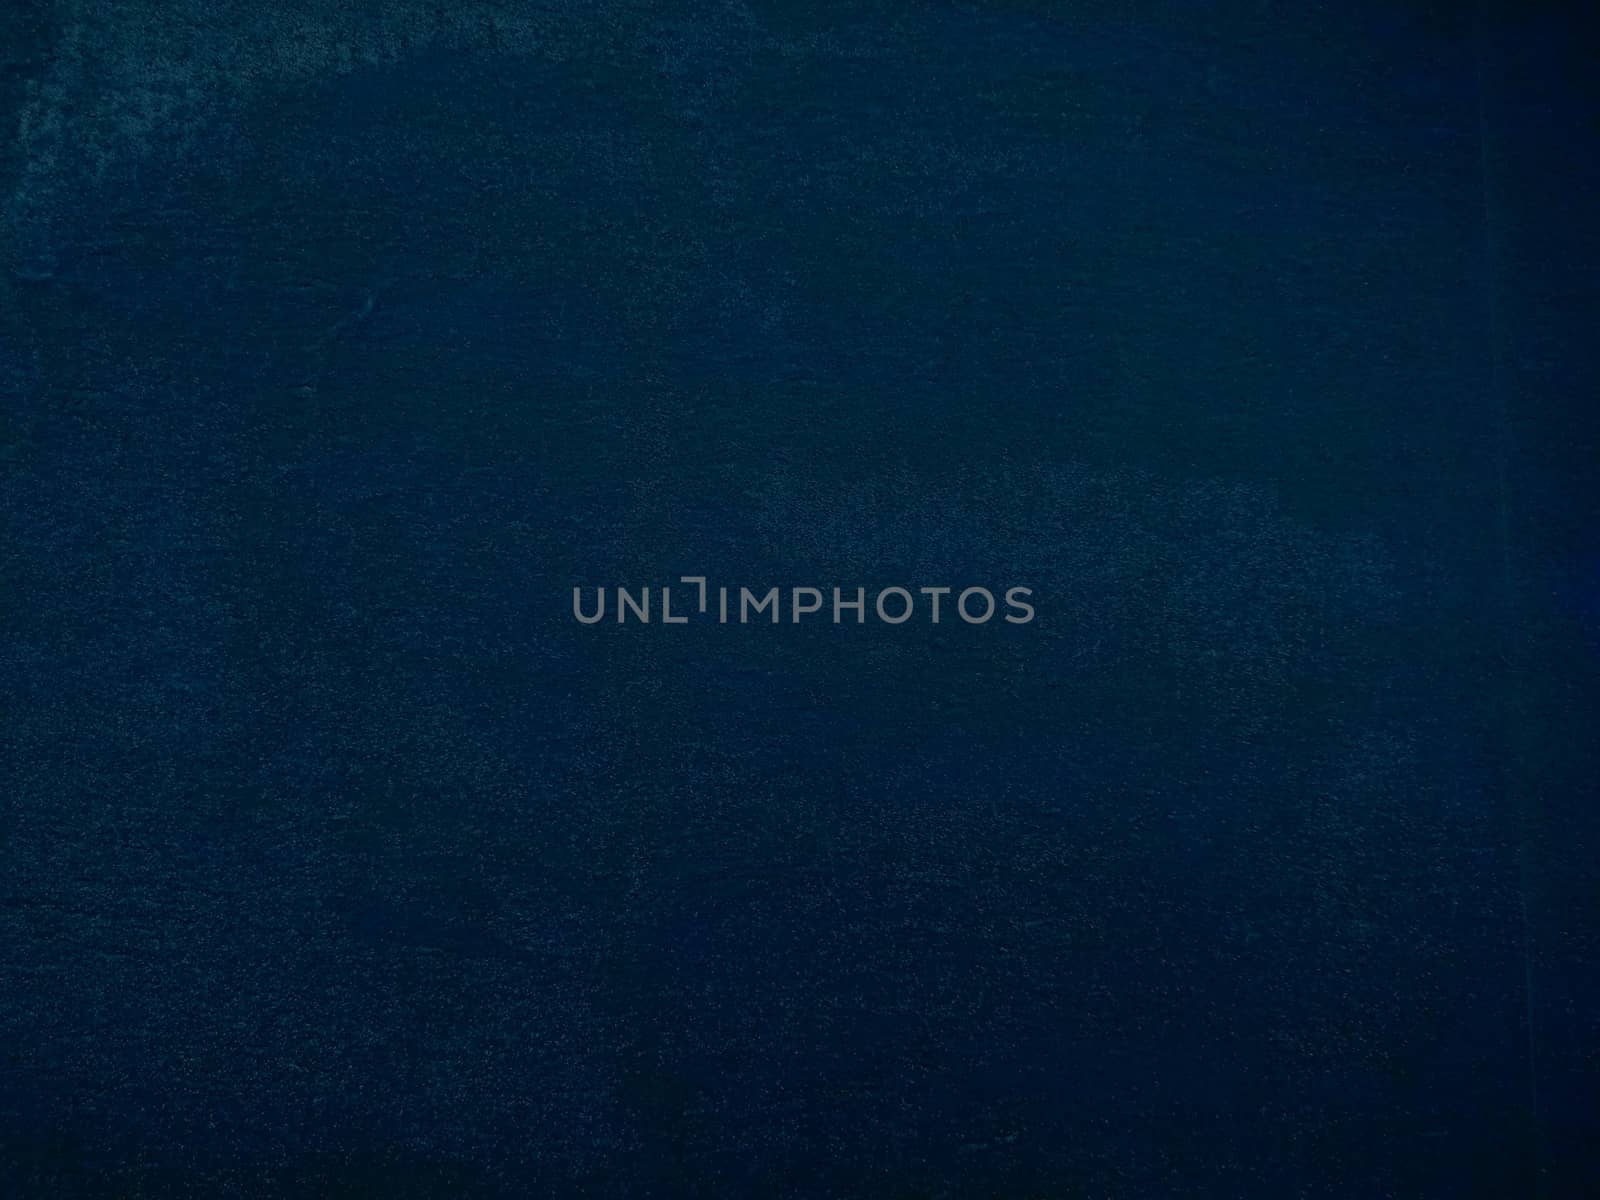 Dark blue pattern background with painted texture. Blue graphic for white text content